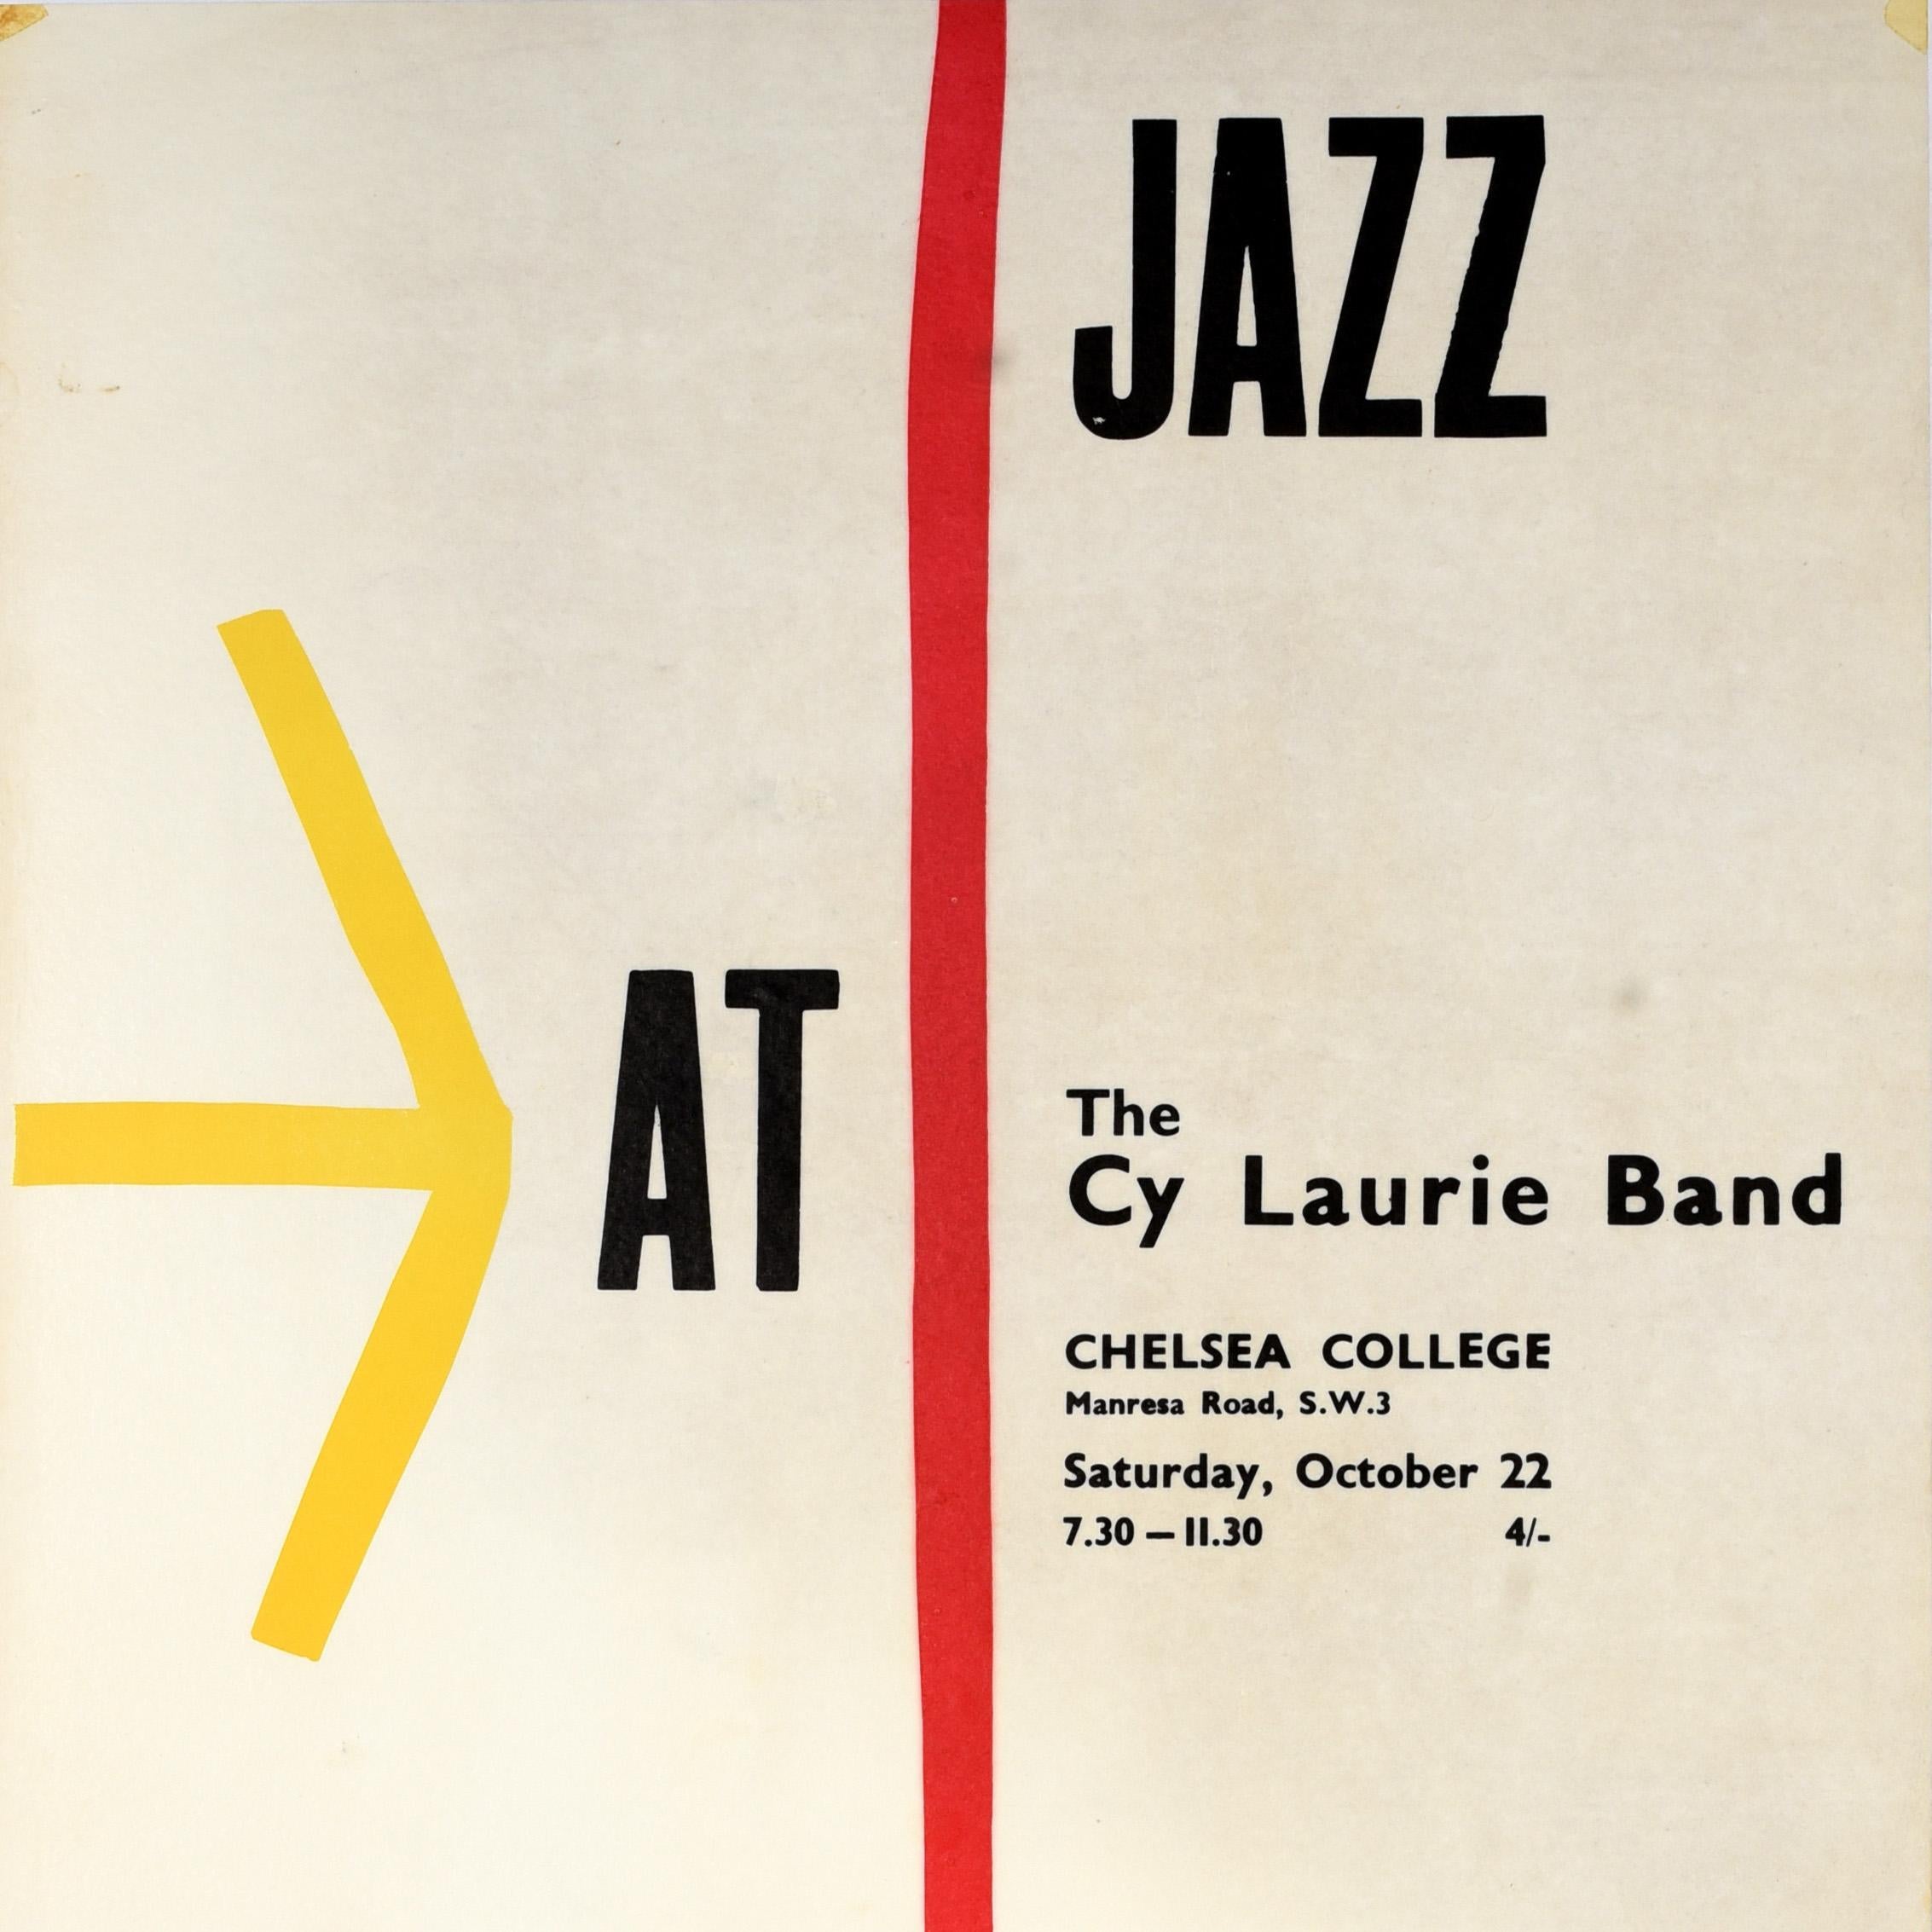 British Original Vintage Music Advertising Poster Jazz At Chelsea Cy Laurie Band London For Sale